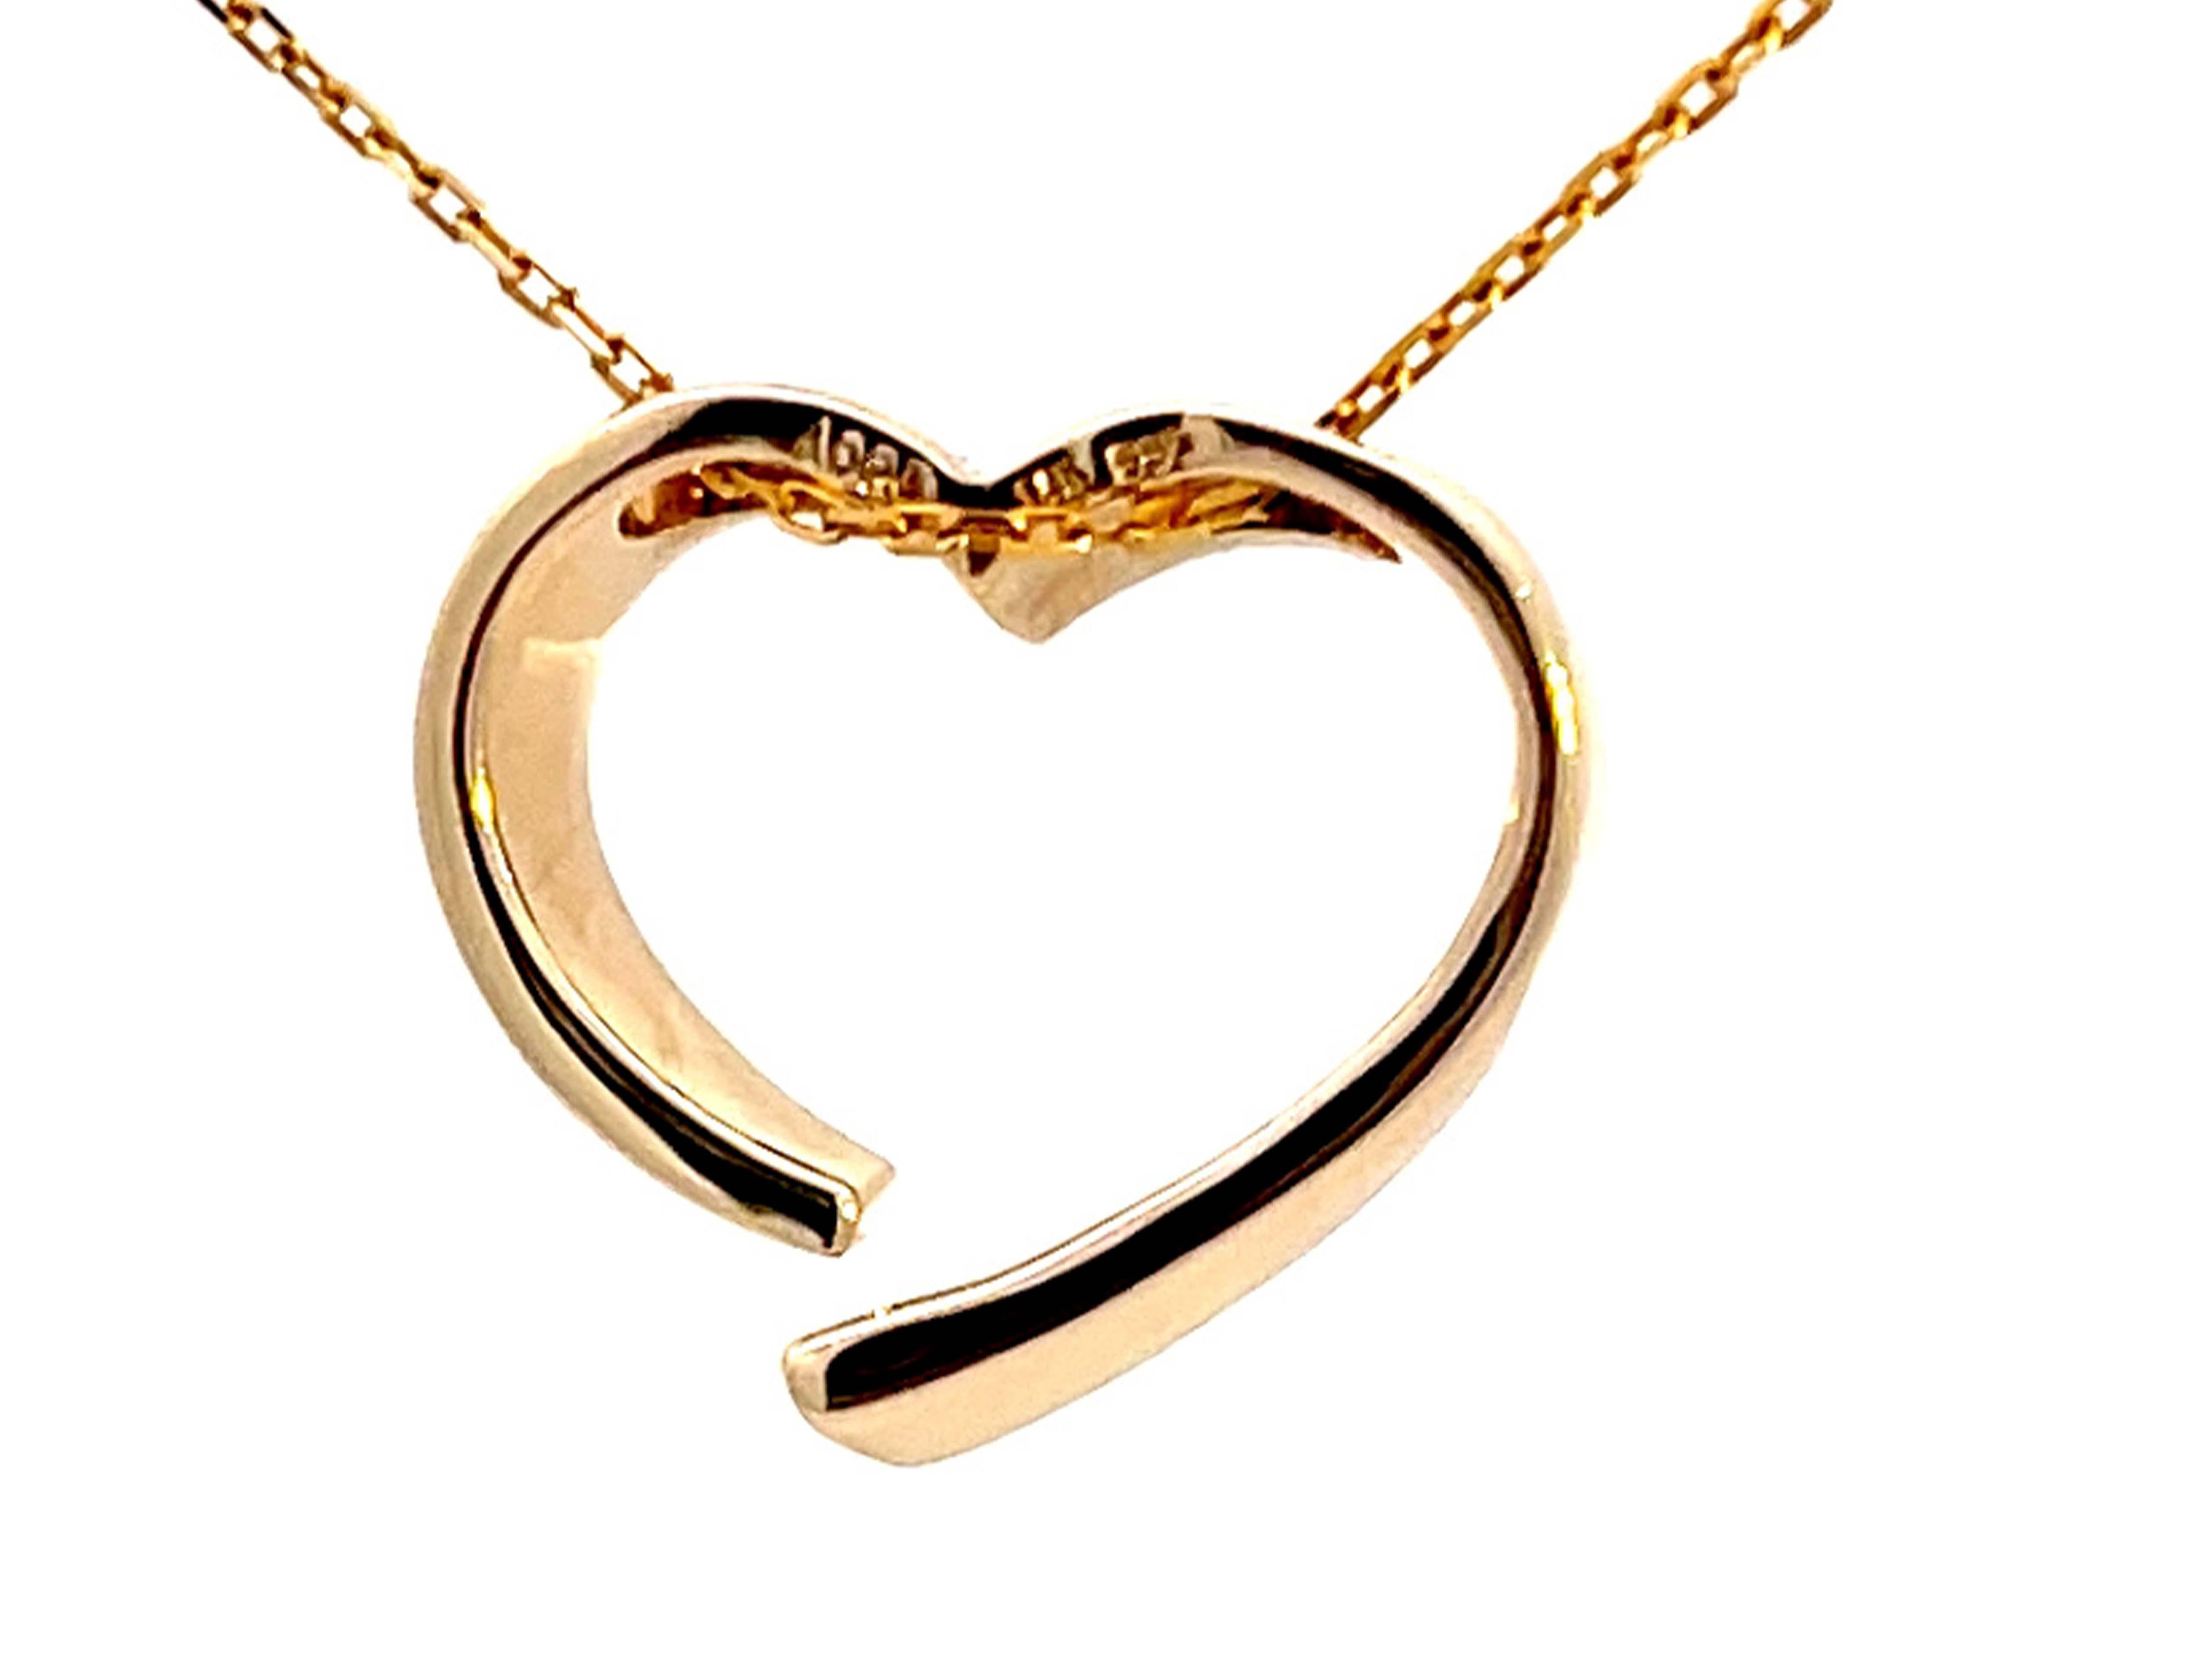 Open Diamond Heart Pendant with Chain in 14k Yellow Gold In Excellent Condition For Sale In Honolulu, HI